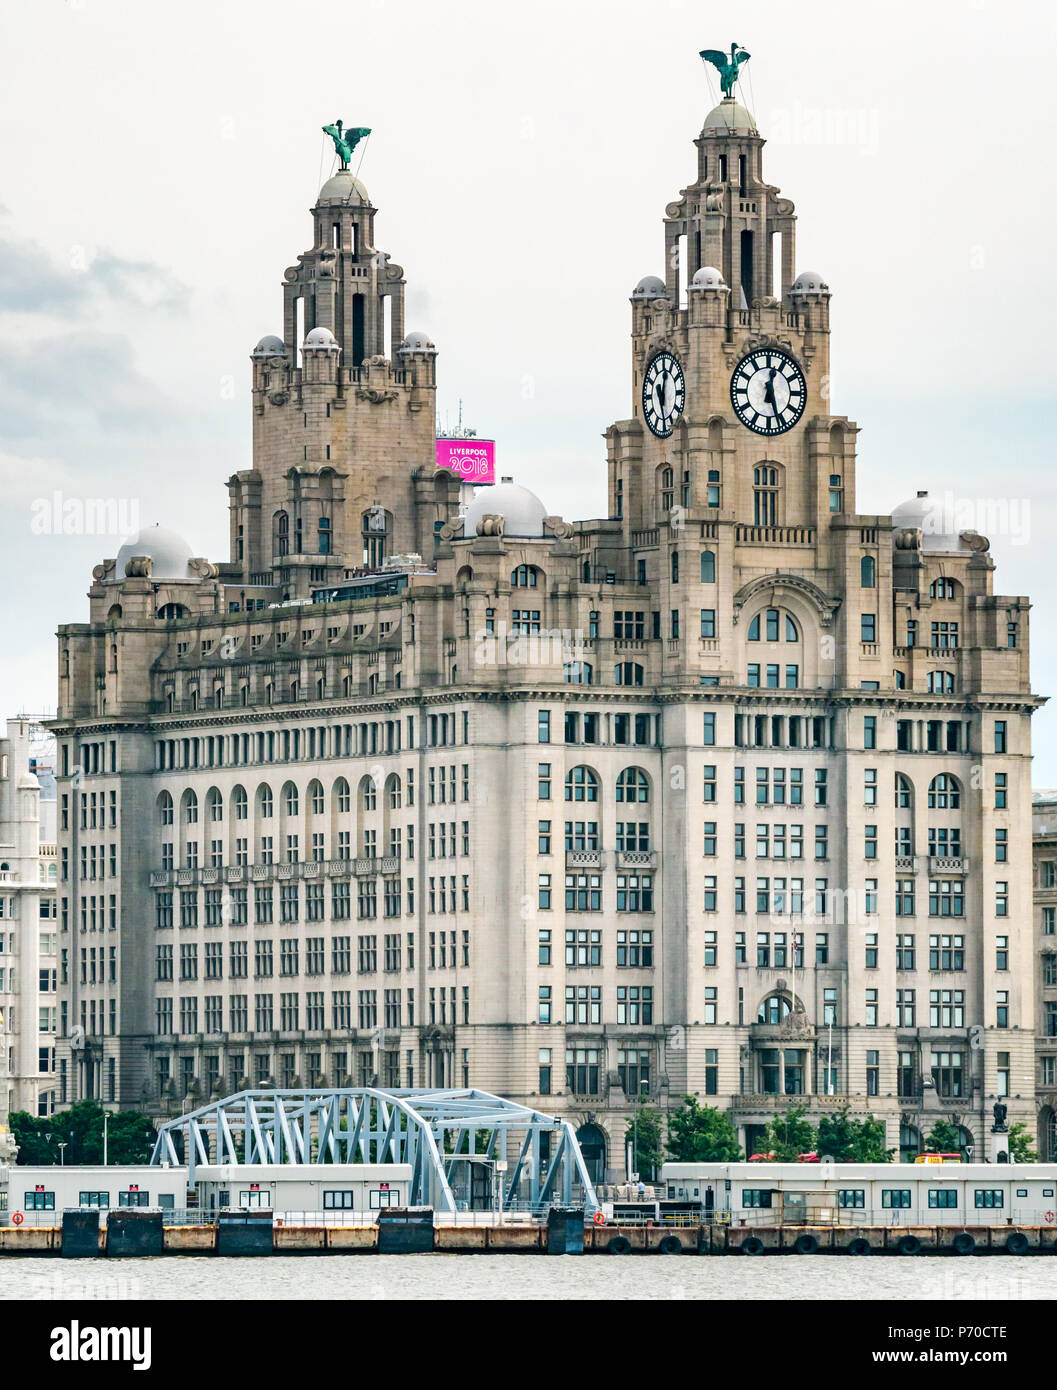 View of clock towers of Royal Liver building with cormorant Liver Birds and UK's largest clocks, Pier Head, Liverpool, England, UK Stock Photo